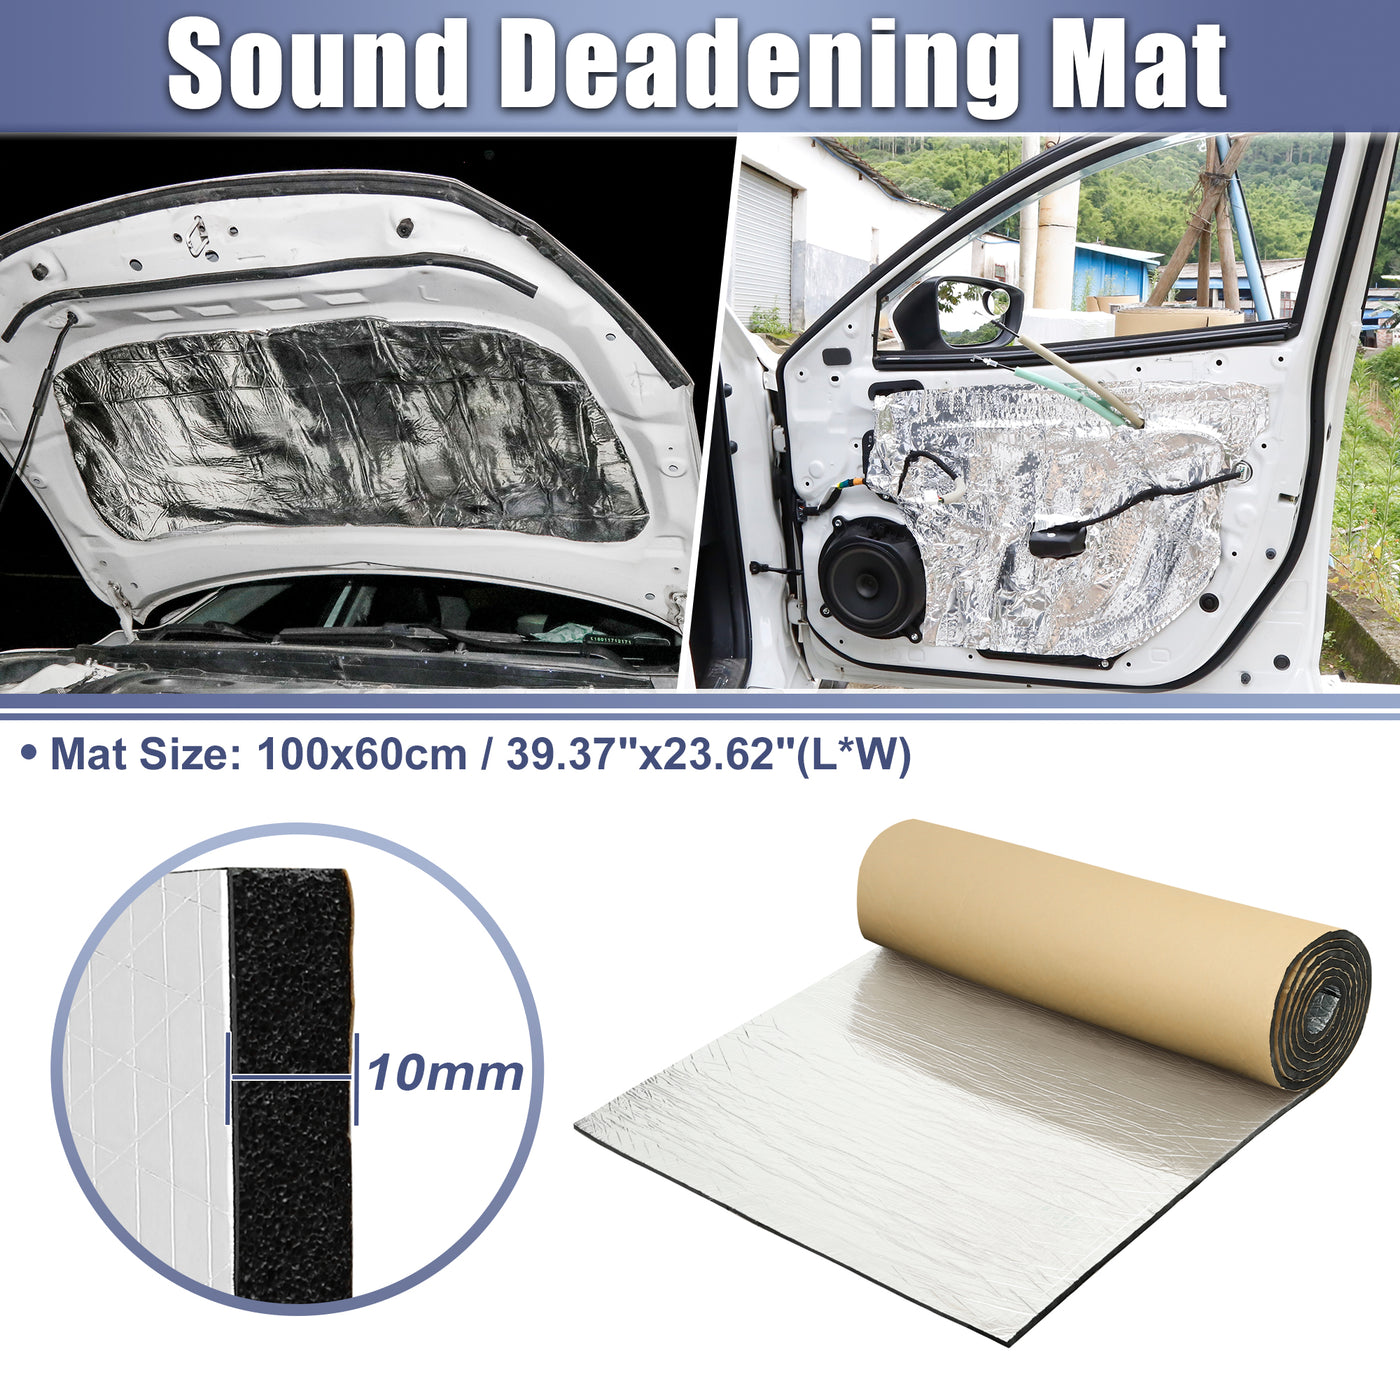 X AUTOHAUX 394mil 10mm 6.45sqft Car Sound Deadening Mat Aluminum Foil Closed Cell Foam Heat Shield Material Damping Self Adhesive Universal for Hood Fender and Boat Engine Cover 39.37"x23.62"